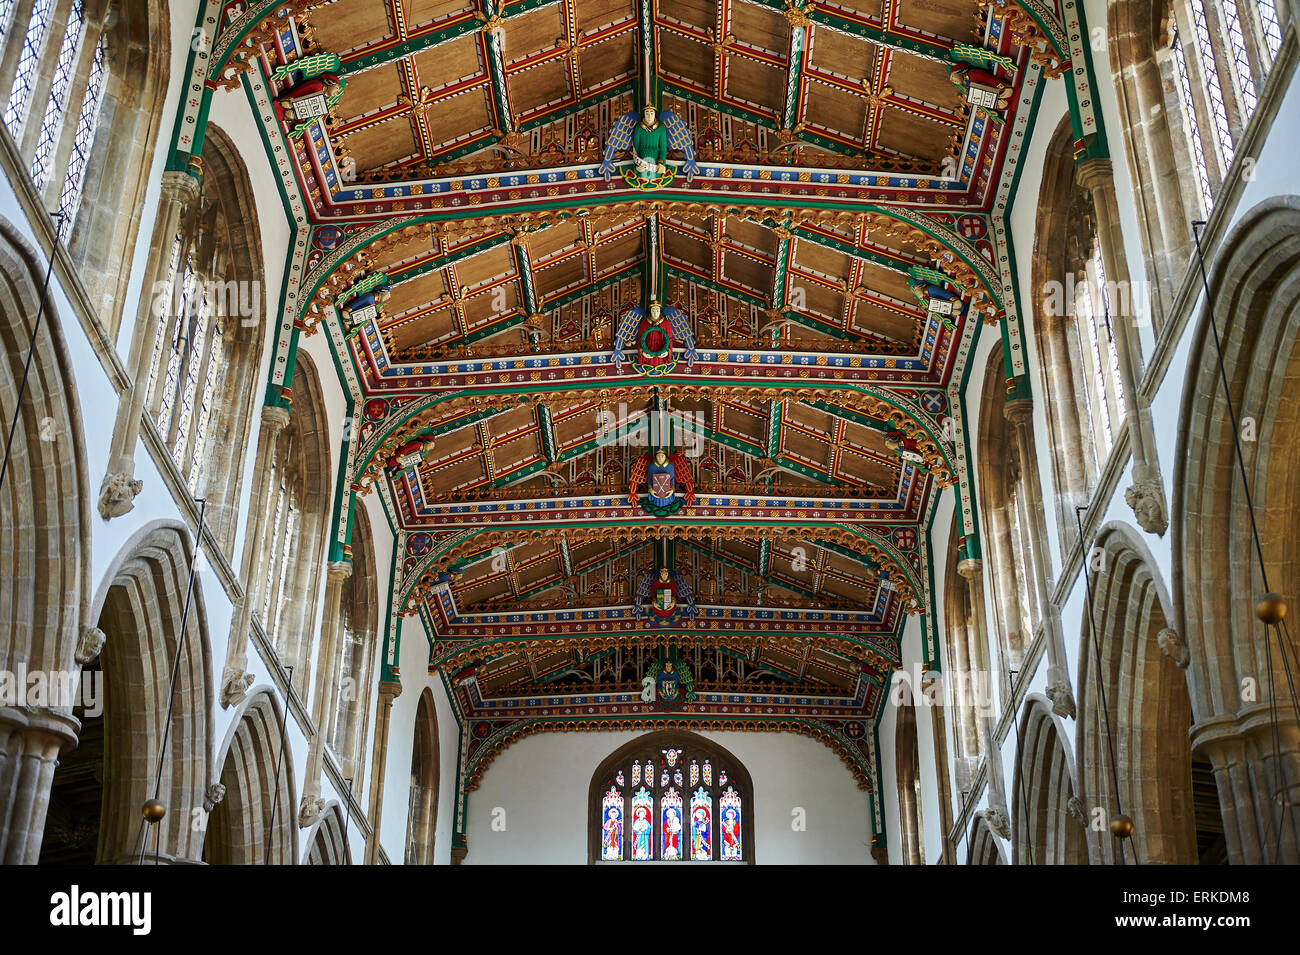 15th century Gothic wooden roof, restored in 1963, St Cuthbert's Church, Wells, Somerset, England, United Kingdom Stock Photo